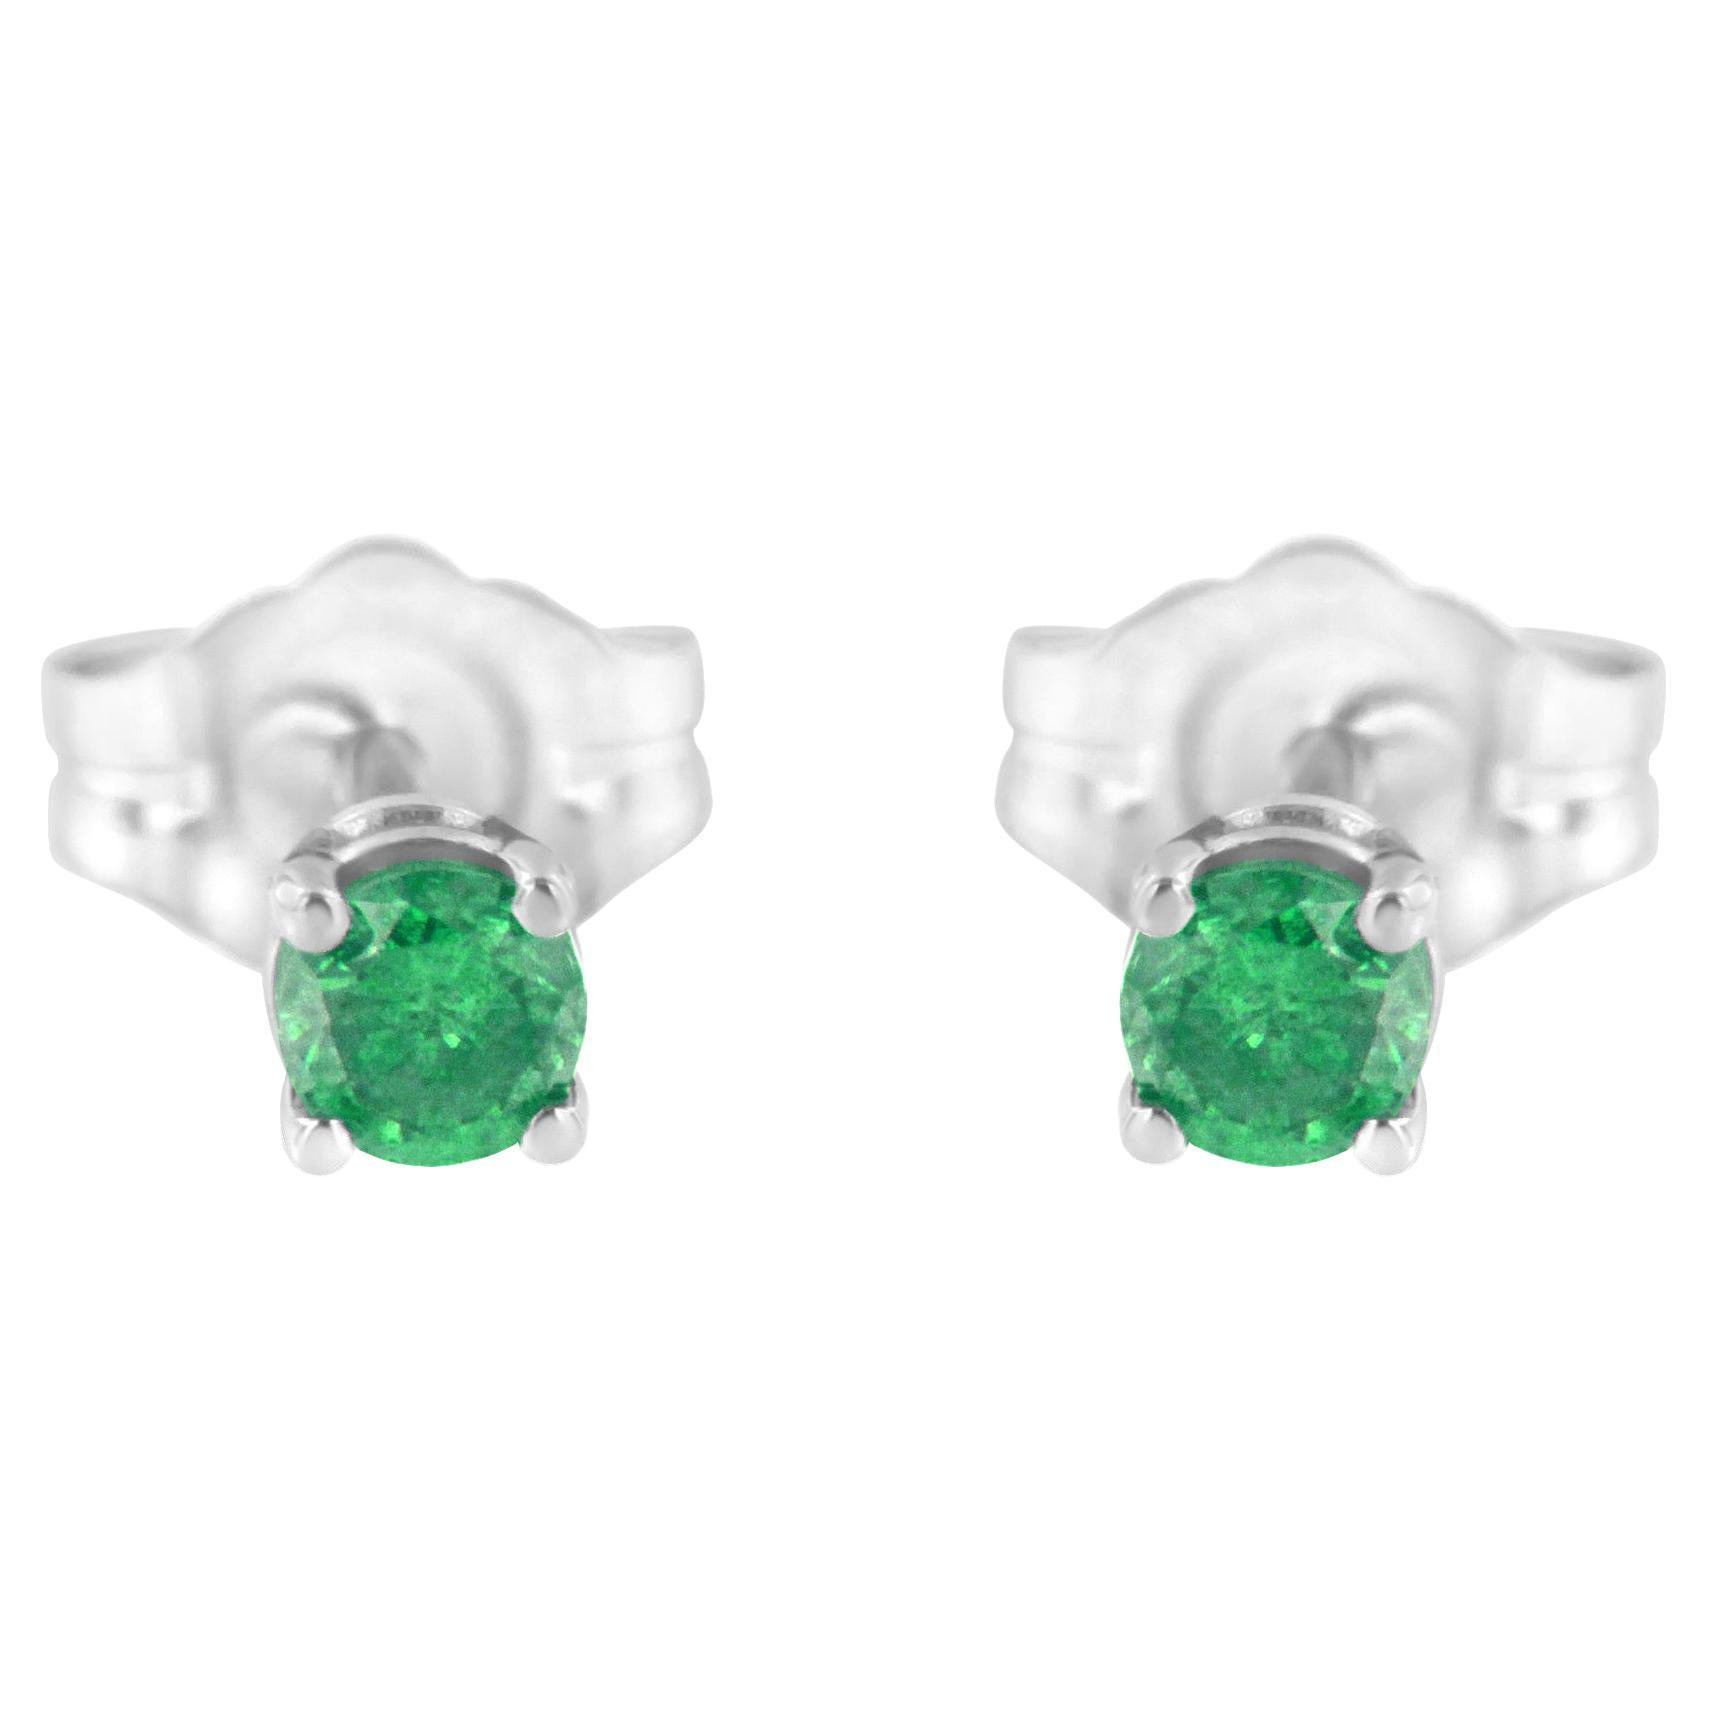 .925 Sterling Silver 1/4 Carat Treated Green Diamond Solitaire Stud Earrings